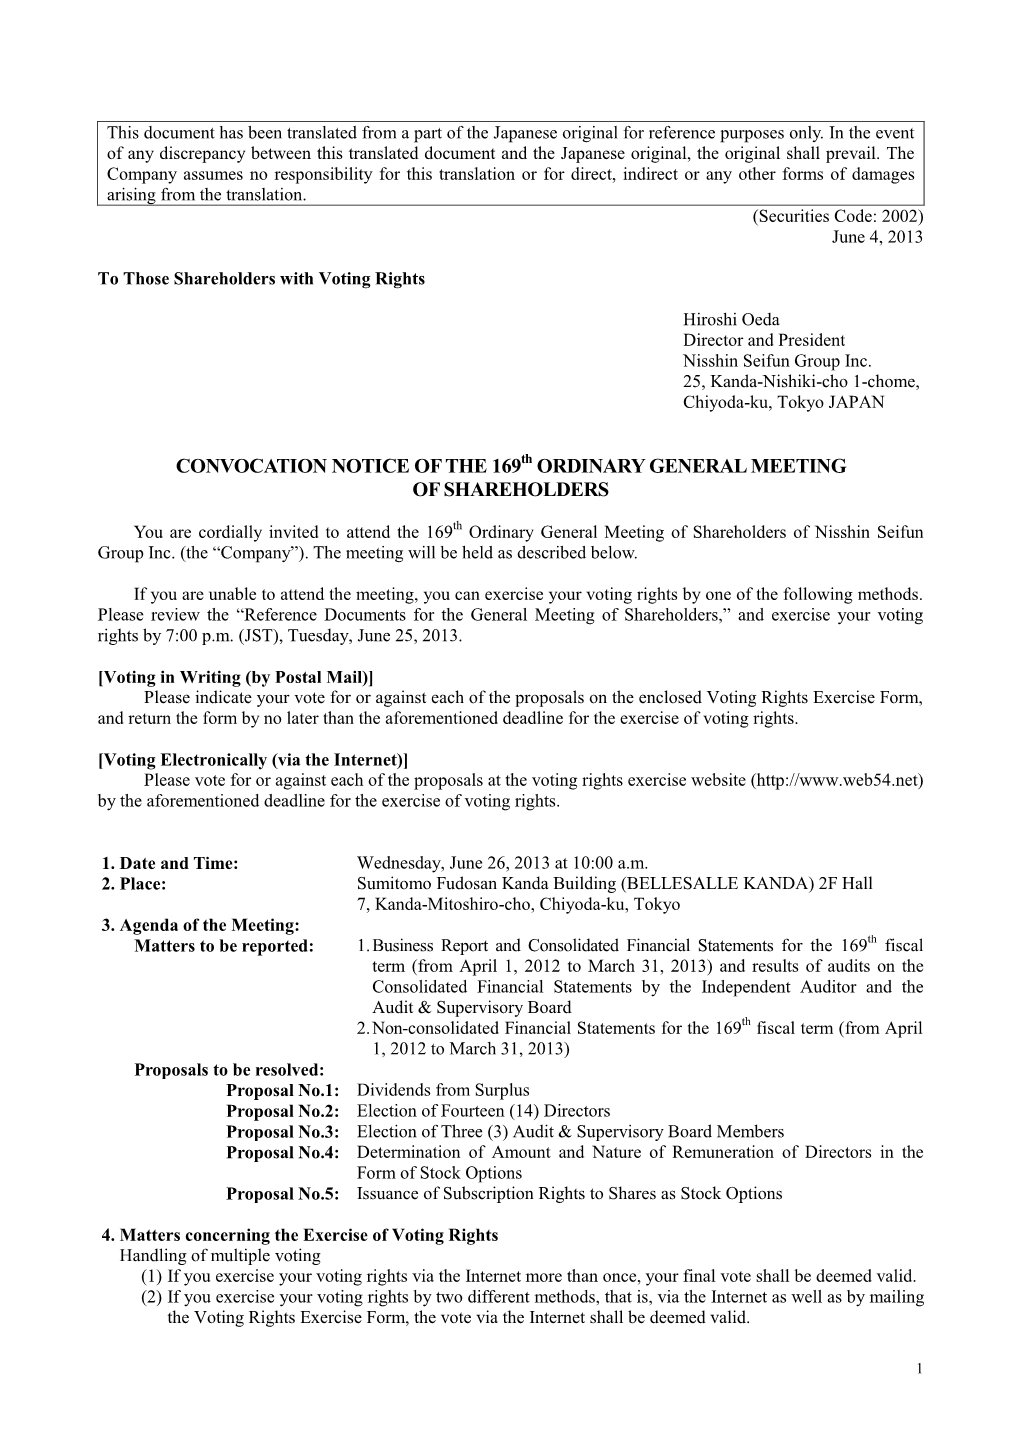 Convocation Notice of the 169 Ordinary General Meeting